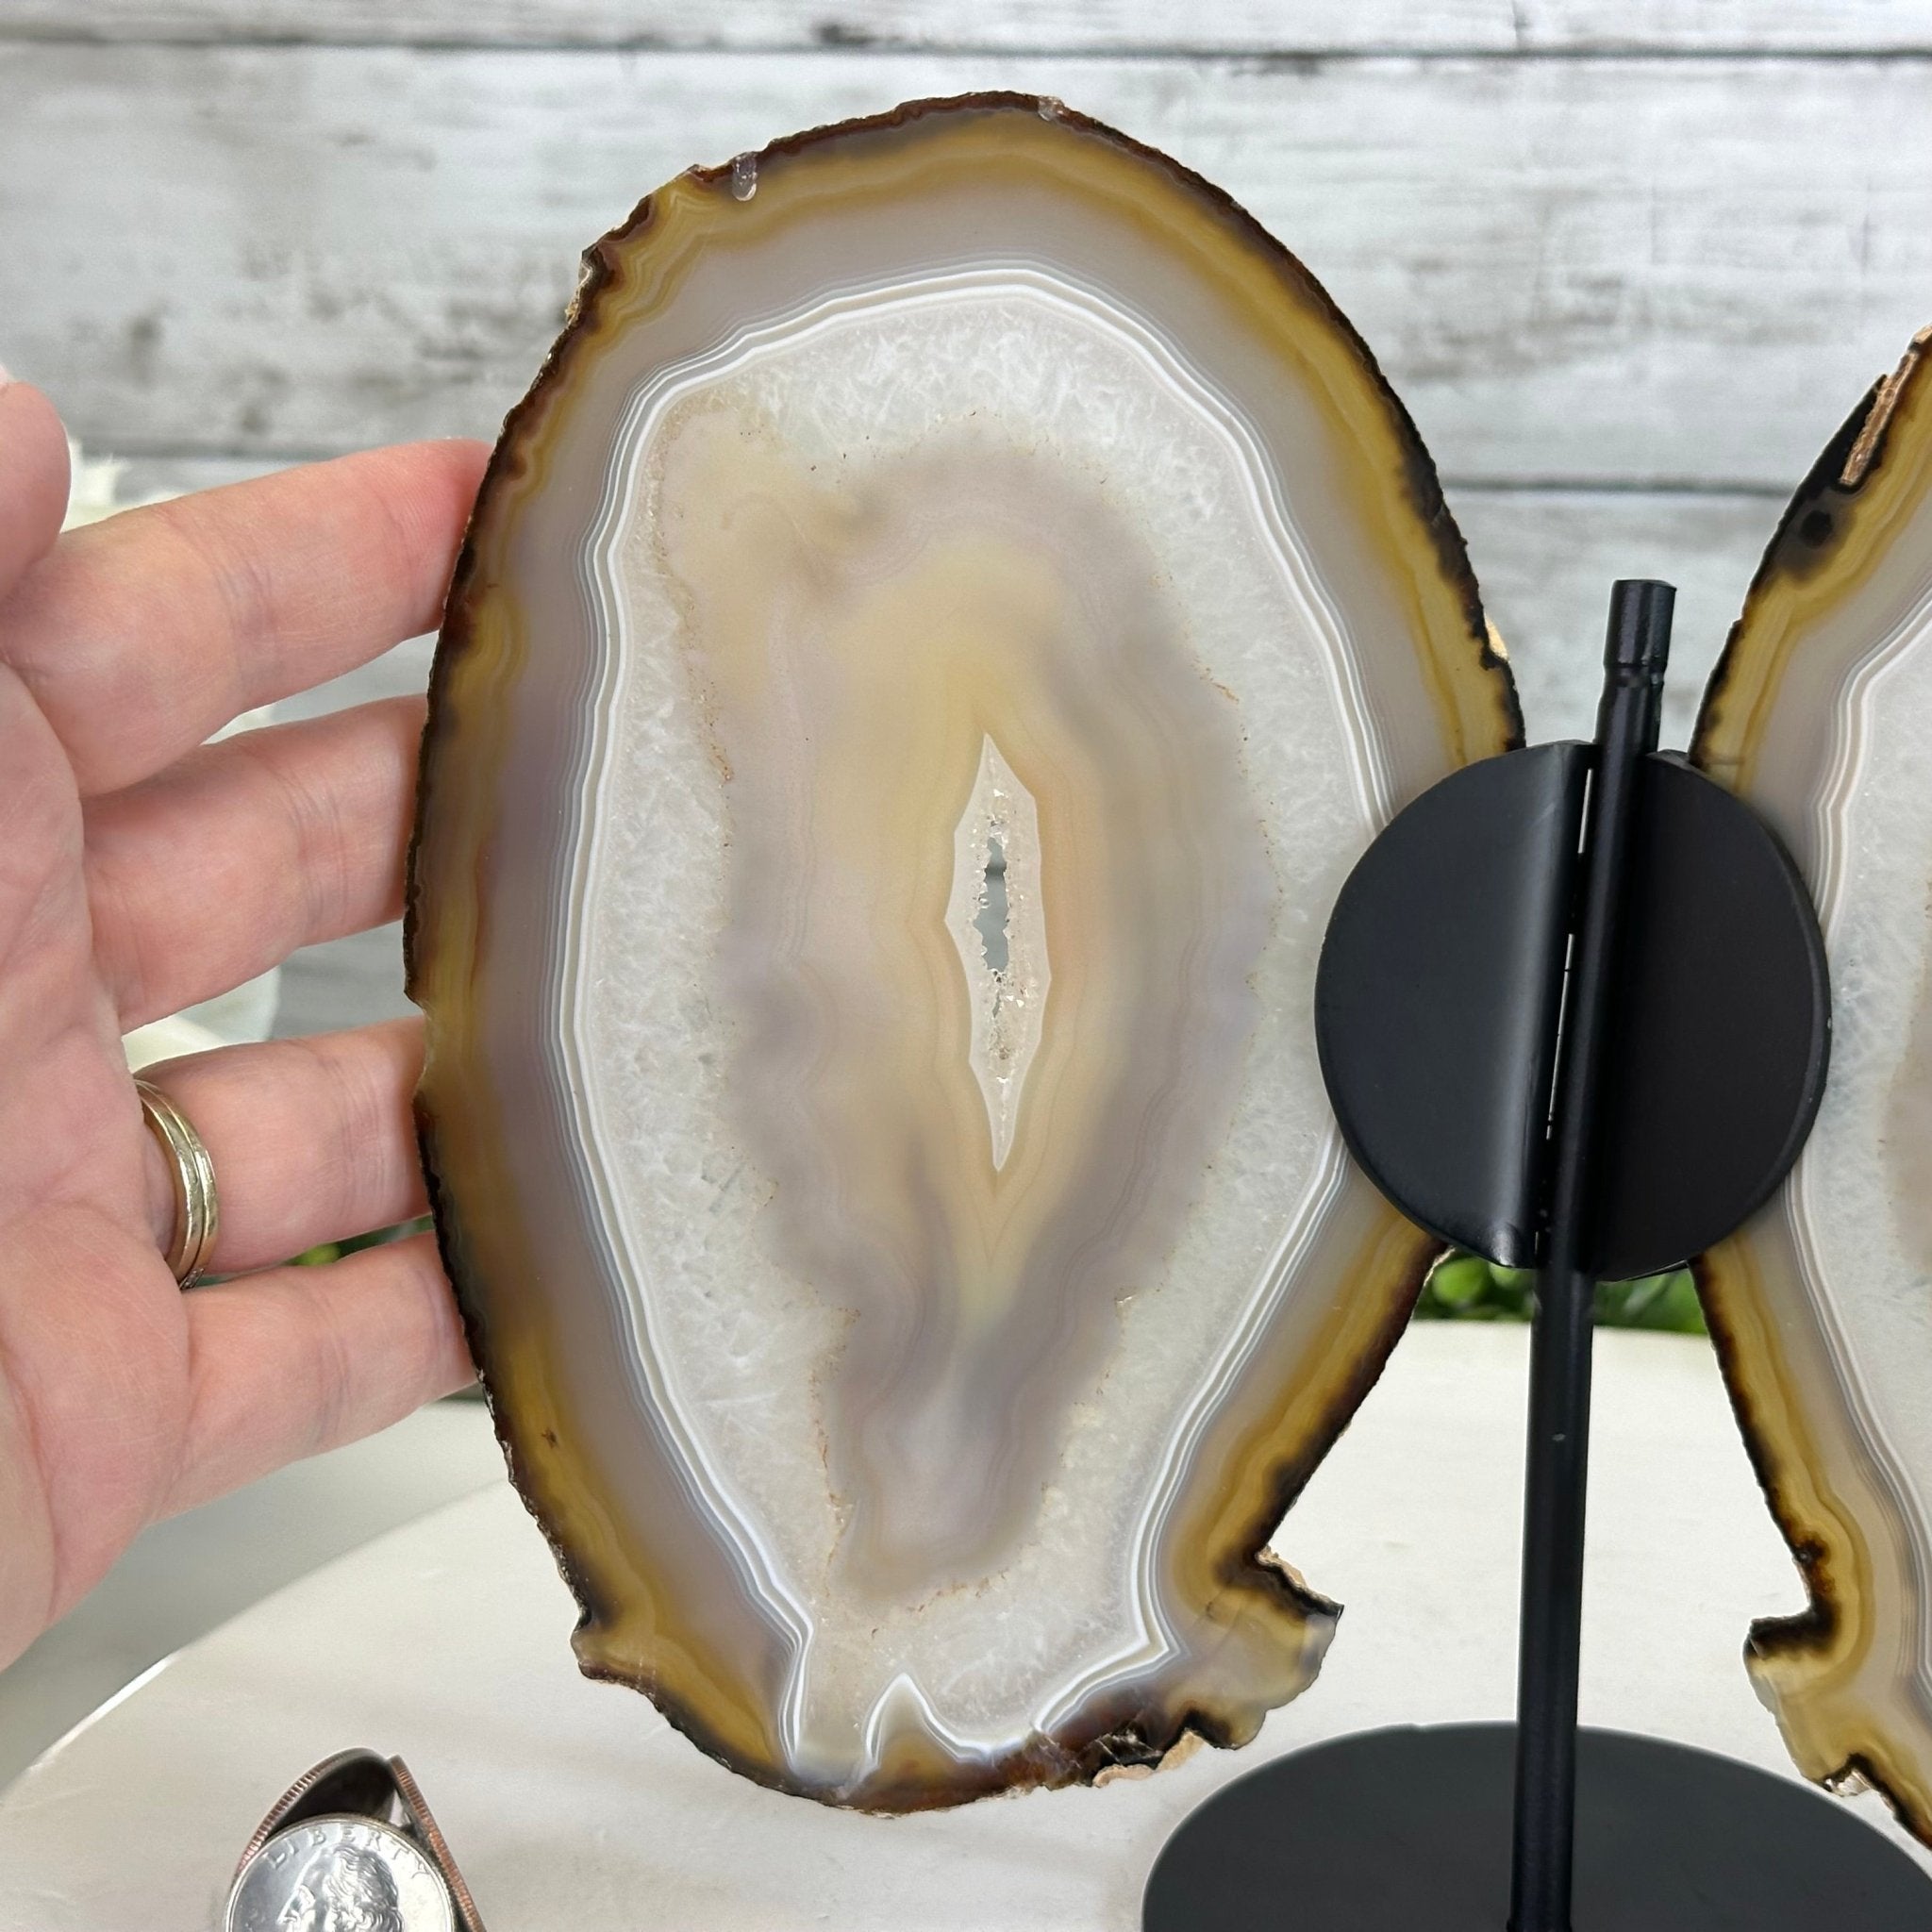 Natural Brazilian Agate "Butterfly Wings", 8" Tall #5050NA-146 - Brazil GemsBrazil GemsNatural Brazilian Agate "Butterfly Wings", 8" Tall #5050NA-146Agate Butterfly Wings5050NA-146